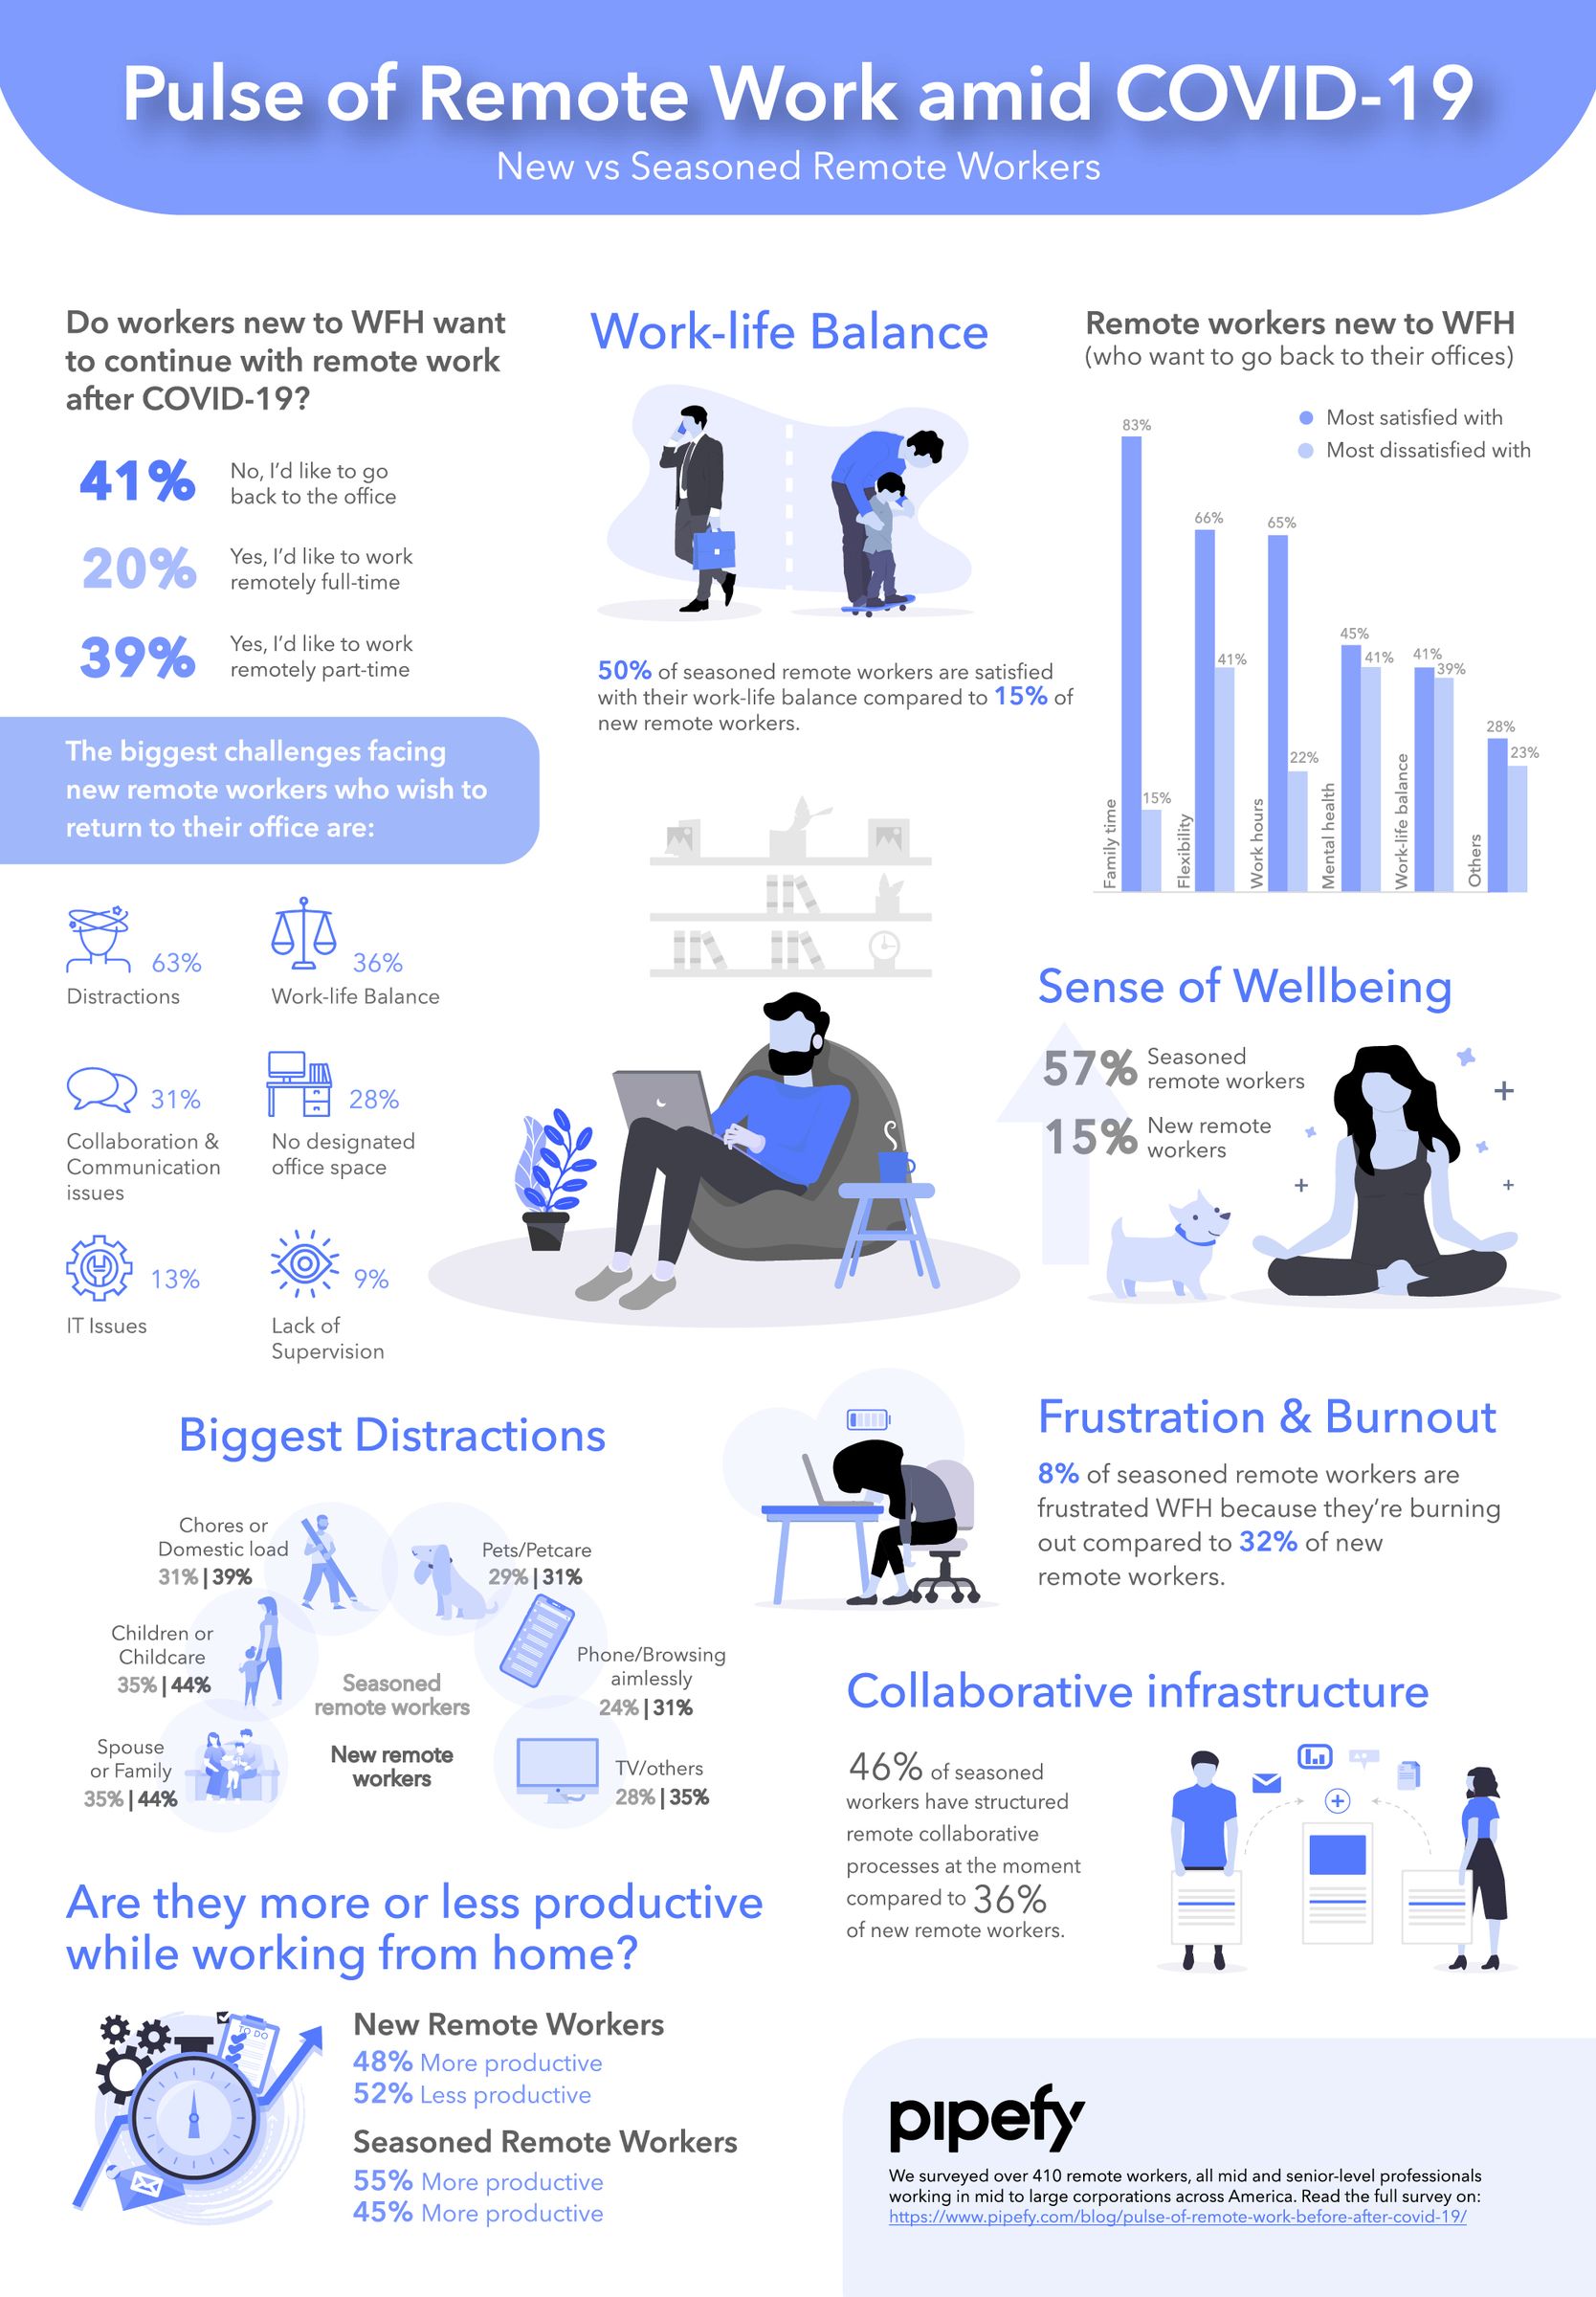 Pipefy Pulse of Remote Work amid COVID-19 infographic